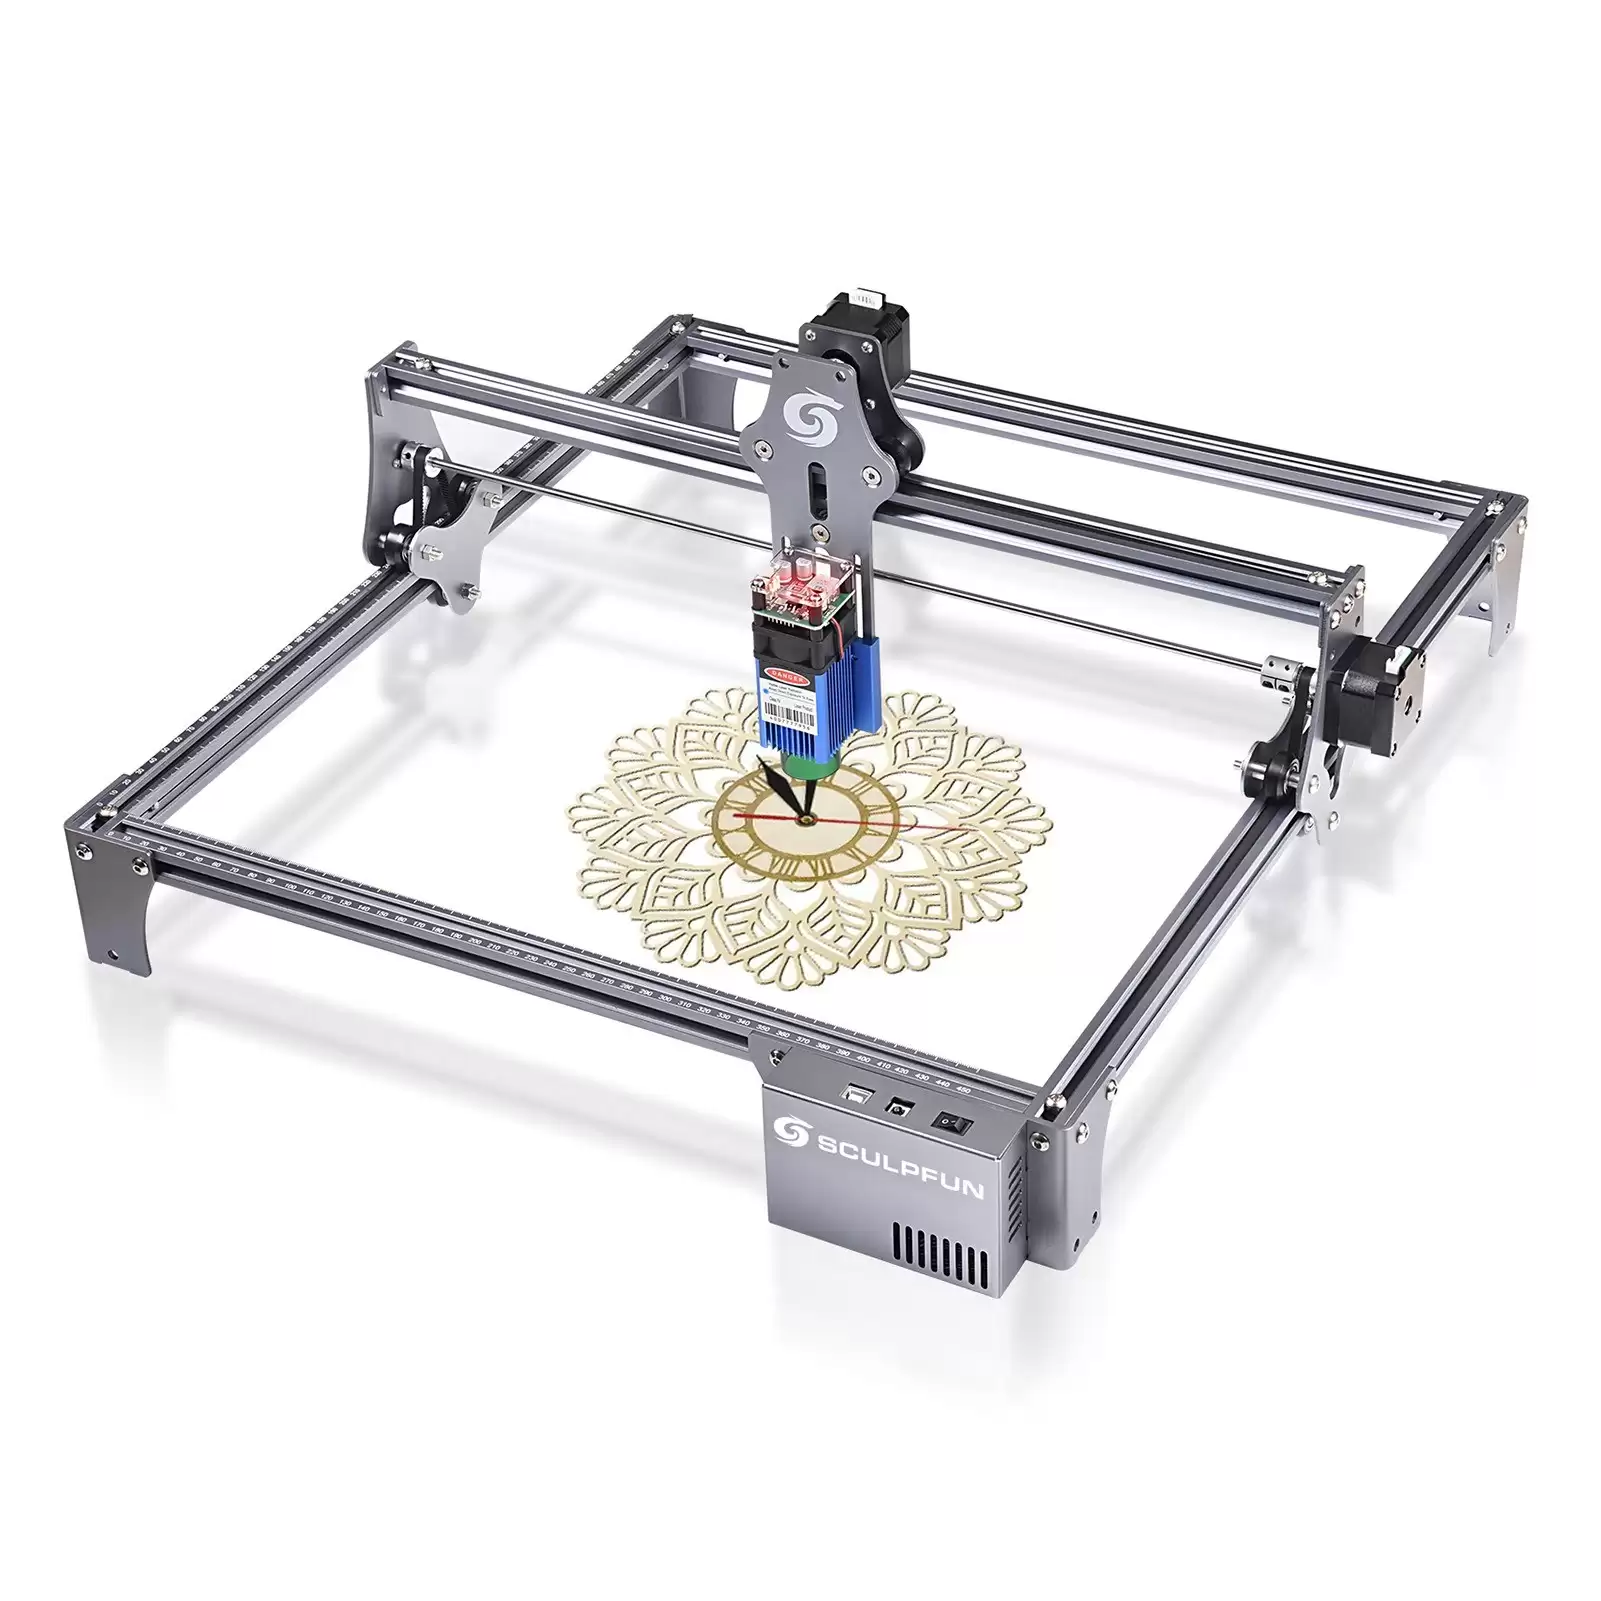 Eu Warehouse Tomtop Deal Coupon Get $114 Off On Sculpfun S6 Pro Spot Compressed Laser Engraver, Free Shipping $315